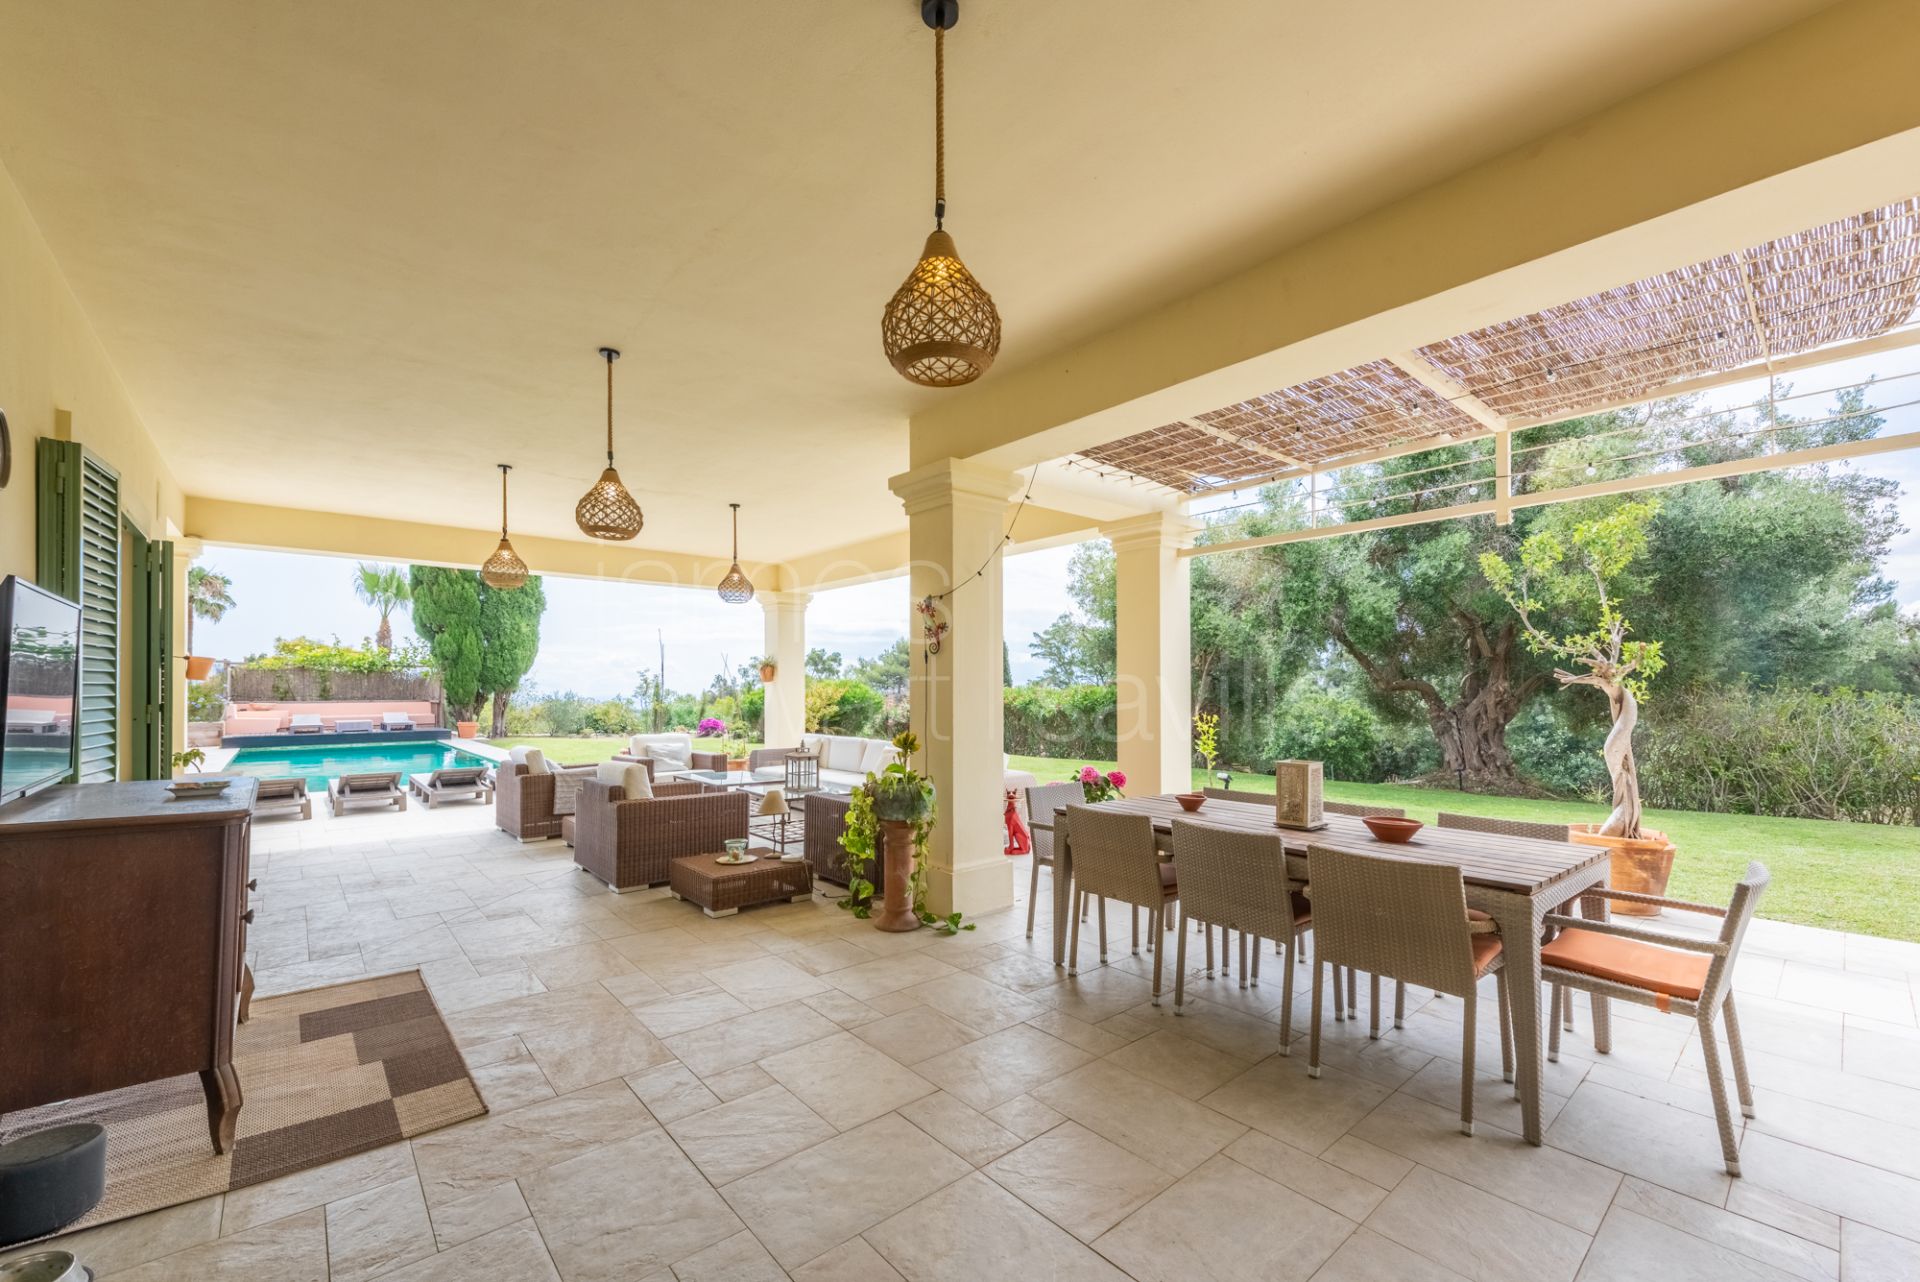 Excellent villa on 4400m2 of plot in the F zone - panoramic sea views and independent guest house